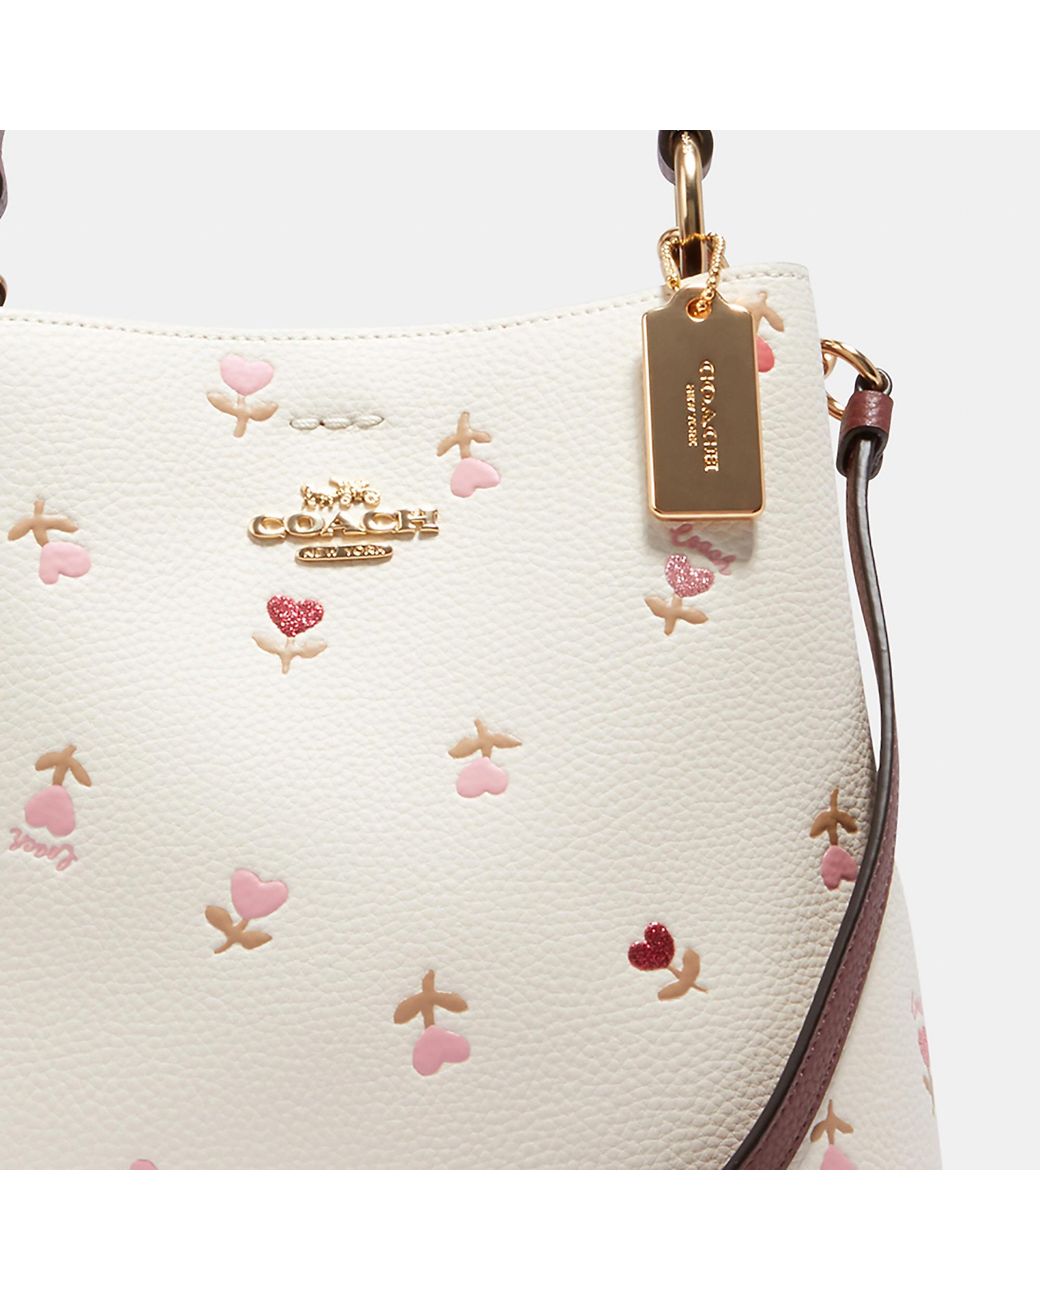 Coach | Bags | Coach Signature Collection Jacquard Fabric Small Bag With  Flower Embroidery | Poshmark